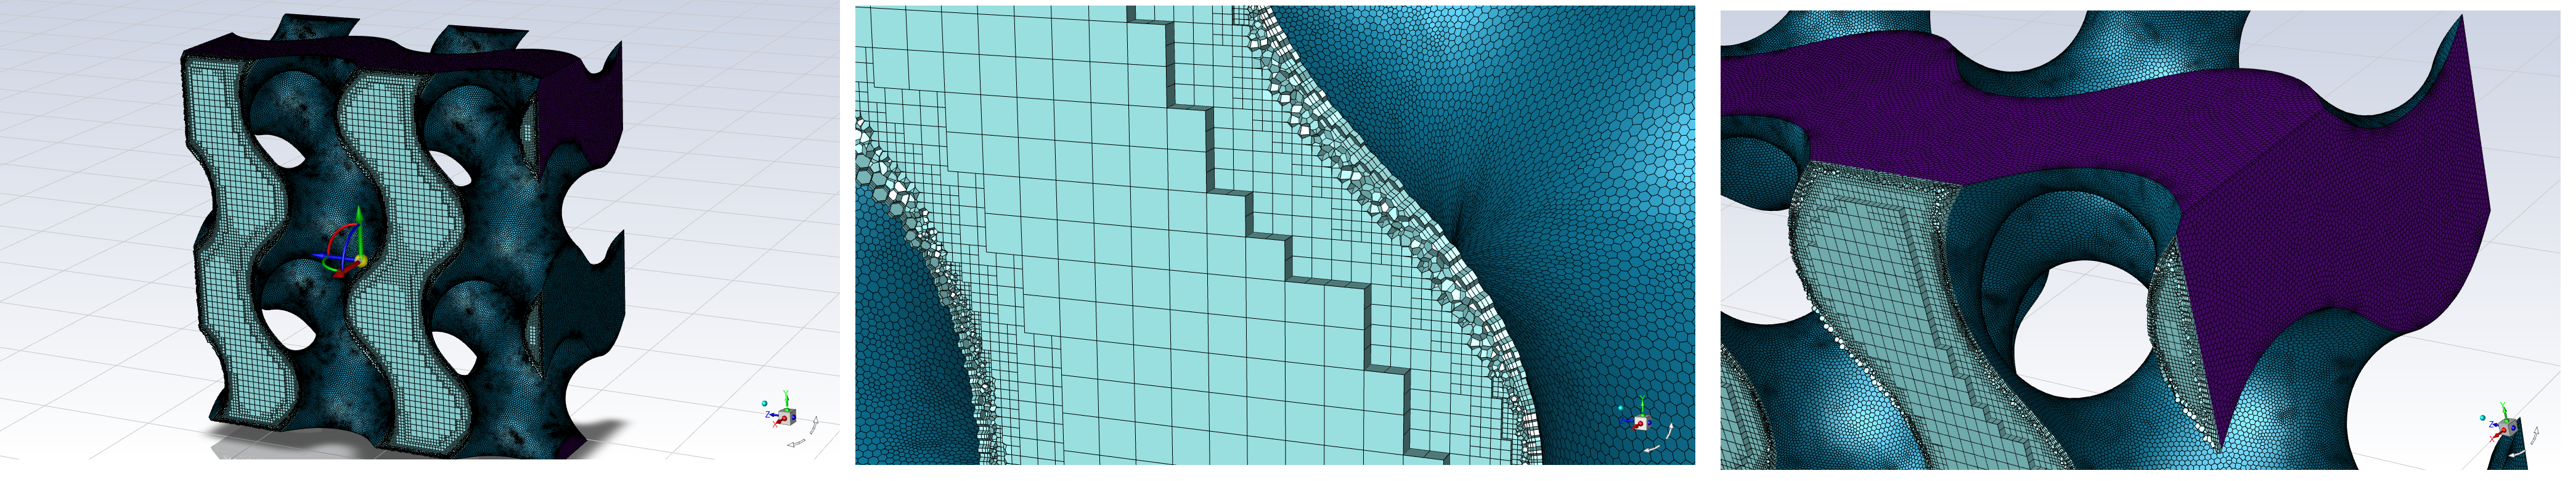 gyroid_poly_hexcore_volume_mesh_ansys_fluent